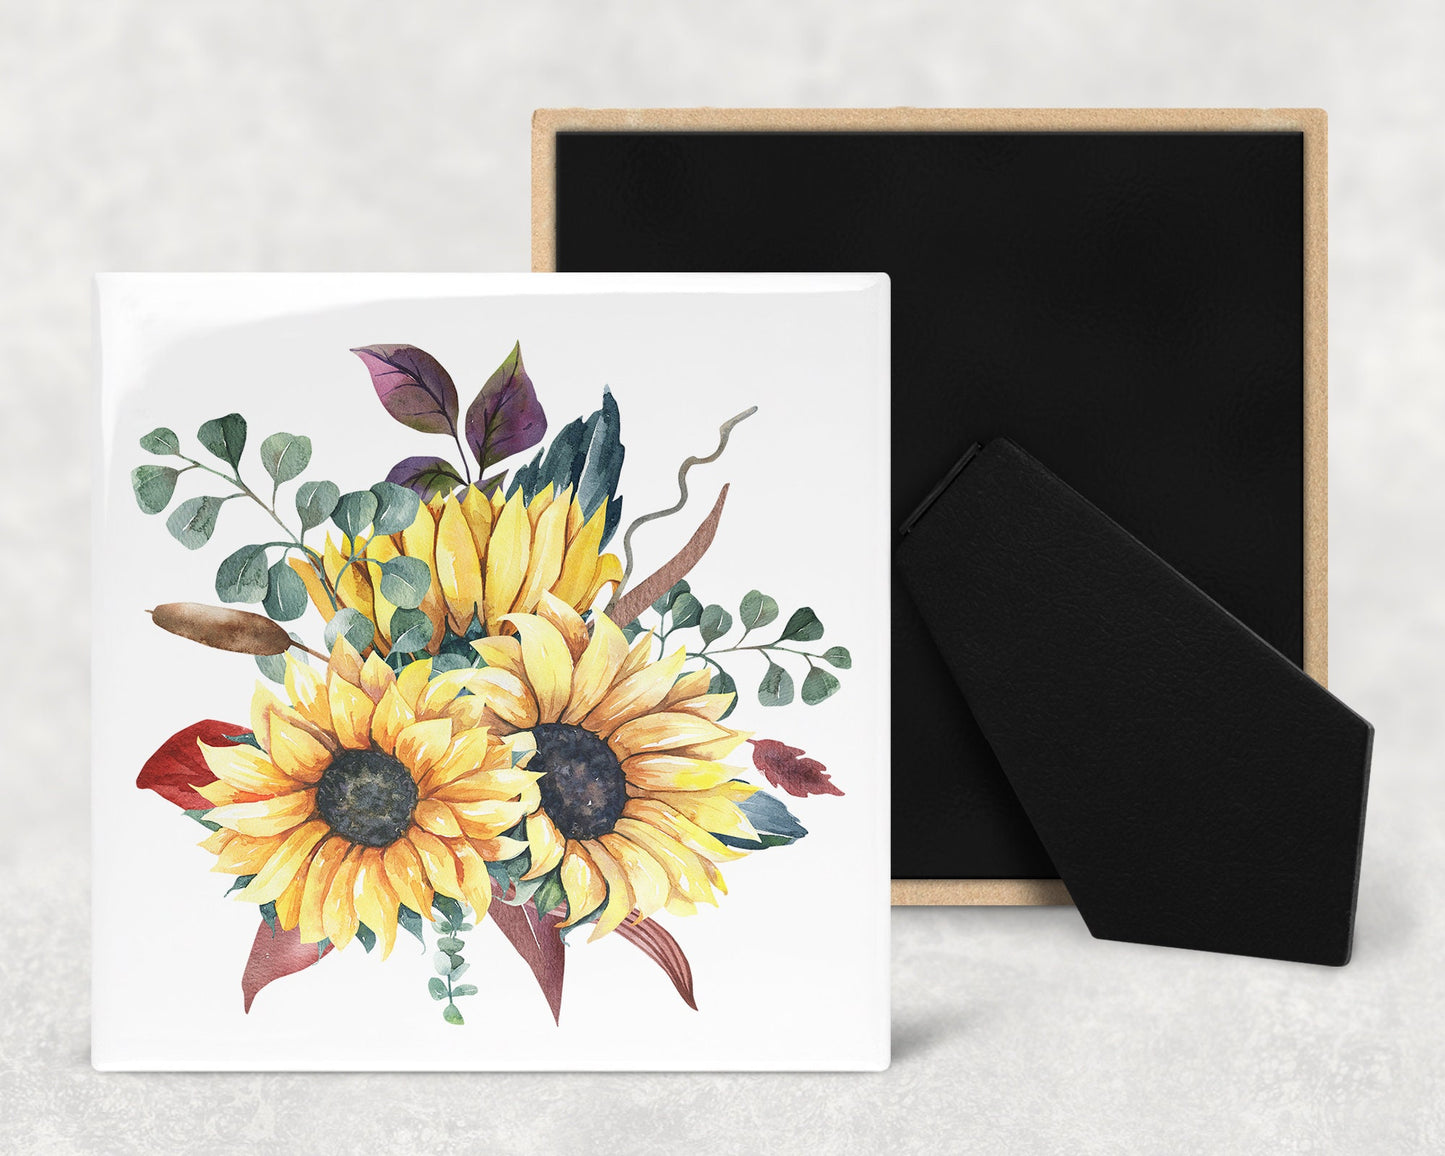 Sunflower Arrangement Art Decorative Ceramic Tile with Optional Easel Back - Available in 3 Sizes